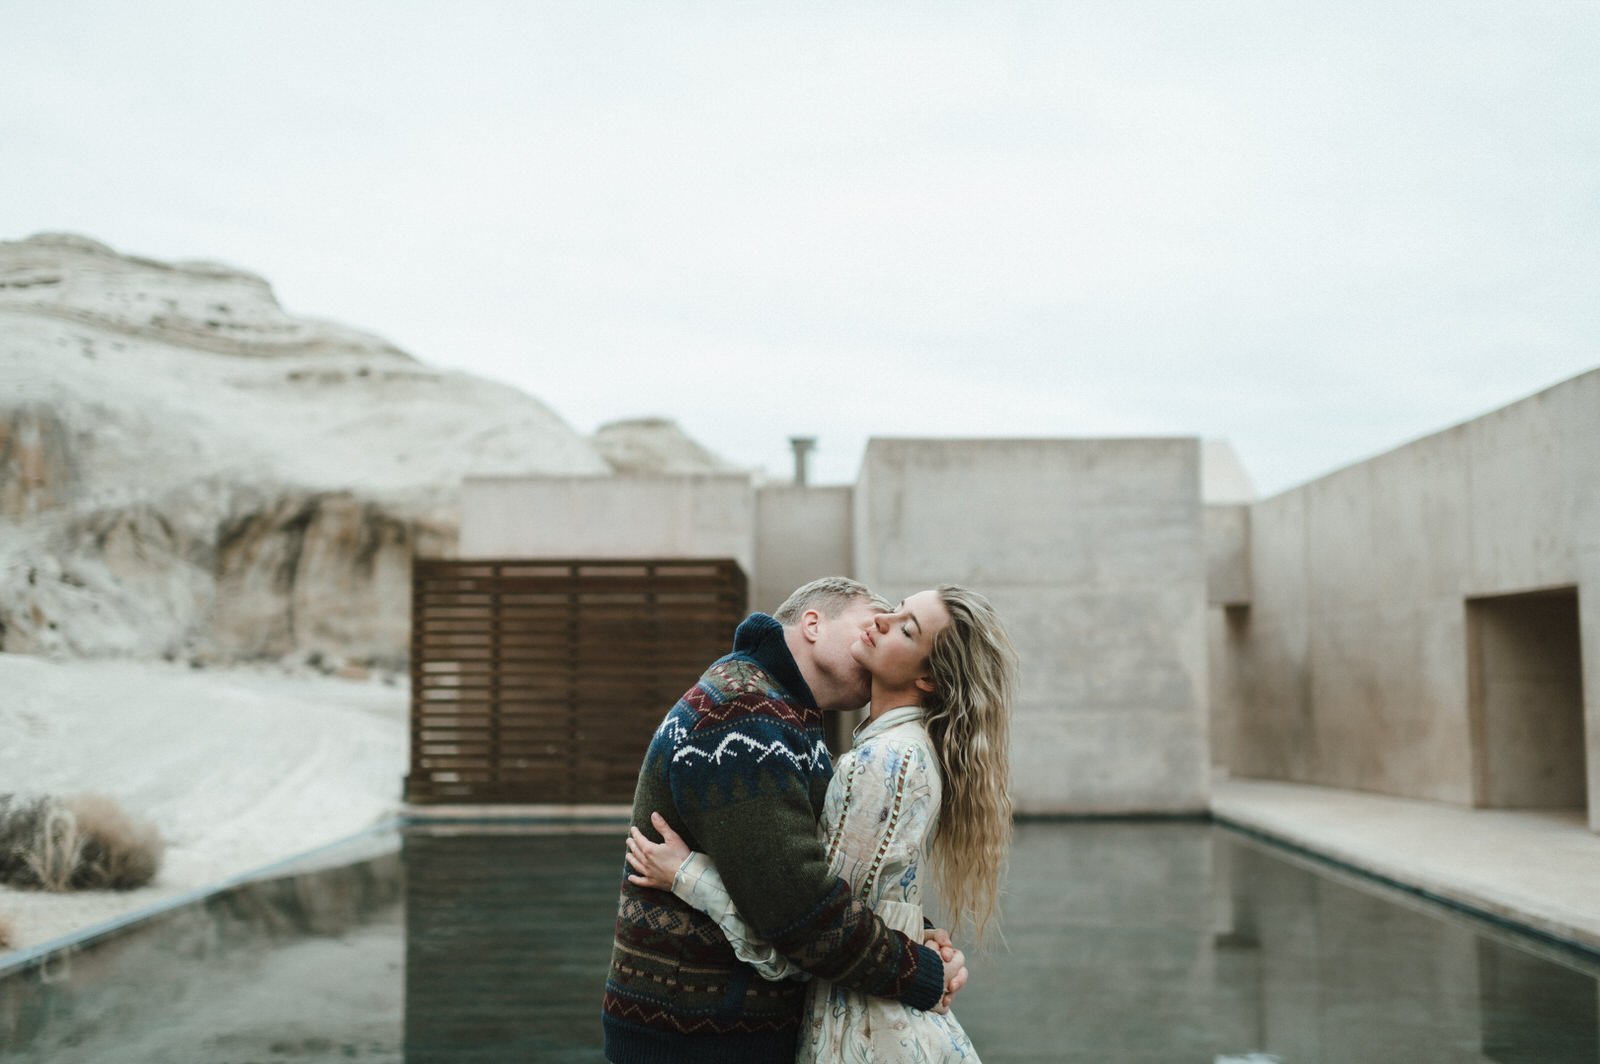 man kneeling down proposing to woman on concrete wall with desert landscape and mesas in the background amangiri